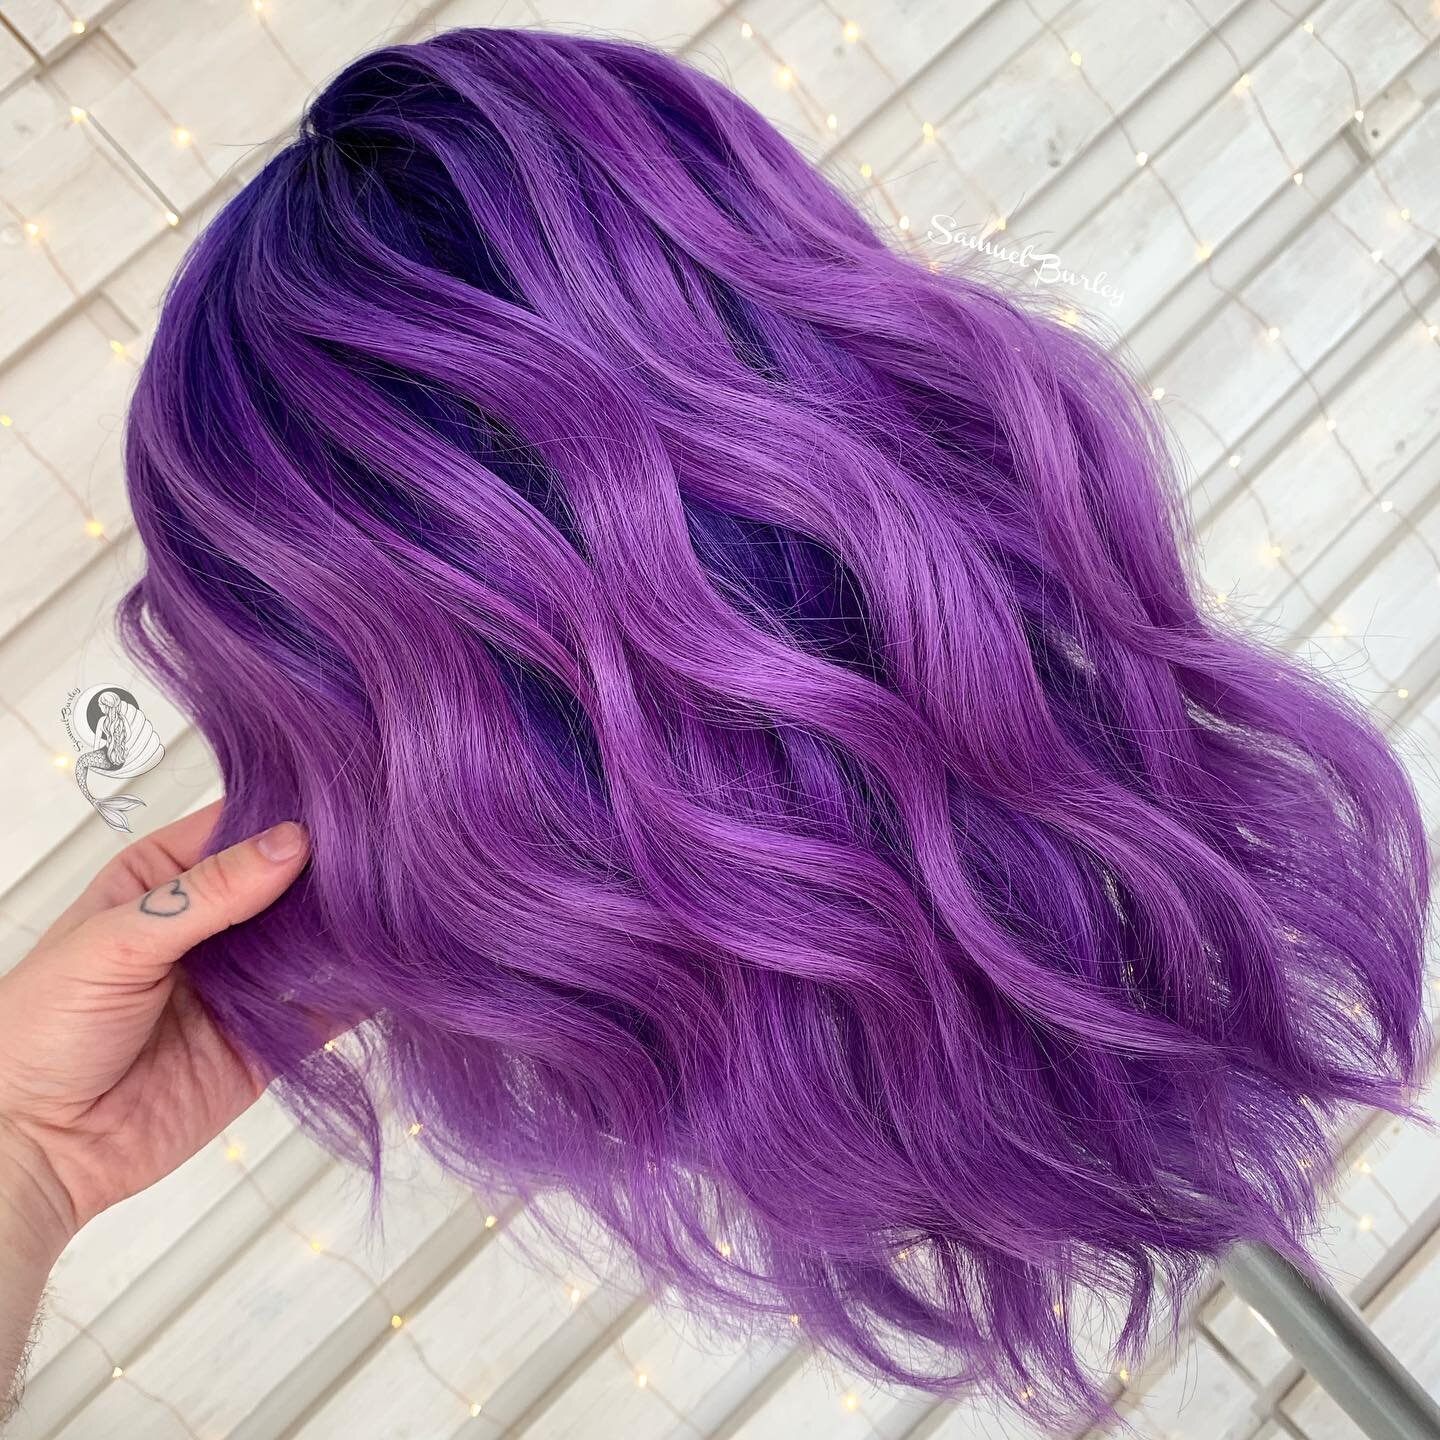 I finally got time to finish this full lace wig and she is serving some serious sea witch vibes with amethyst and sapphire tones and lots of beachy texture. I don&rsquo;t usually work with blue and purple colours because they can fade green and stain